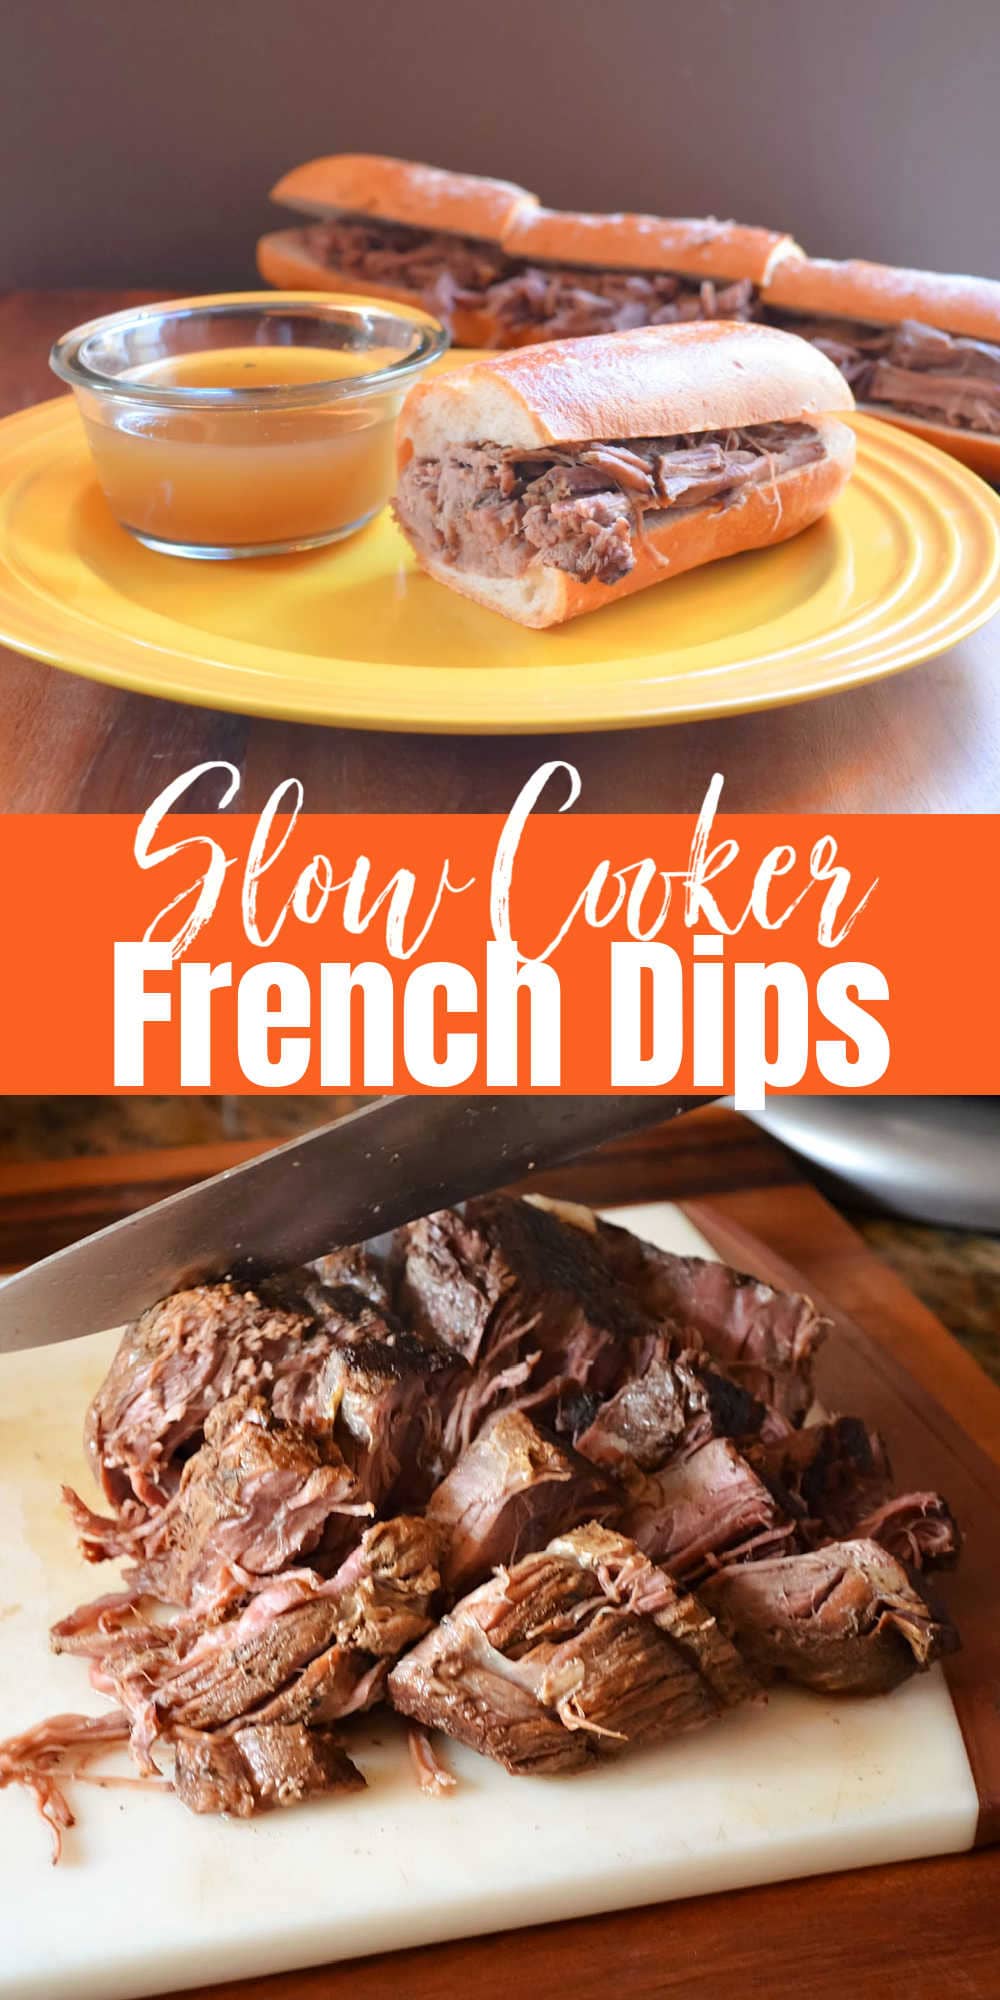 Top Photo is a French Dip Sandwich and the bottom photo is of Chopped up Beef Roast for French Dip Sandwiches there is an orange banner between the two photos with white lettering Slow Cooker French Dips